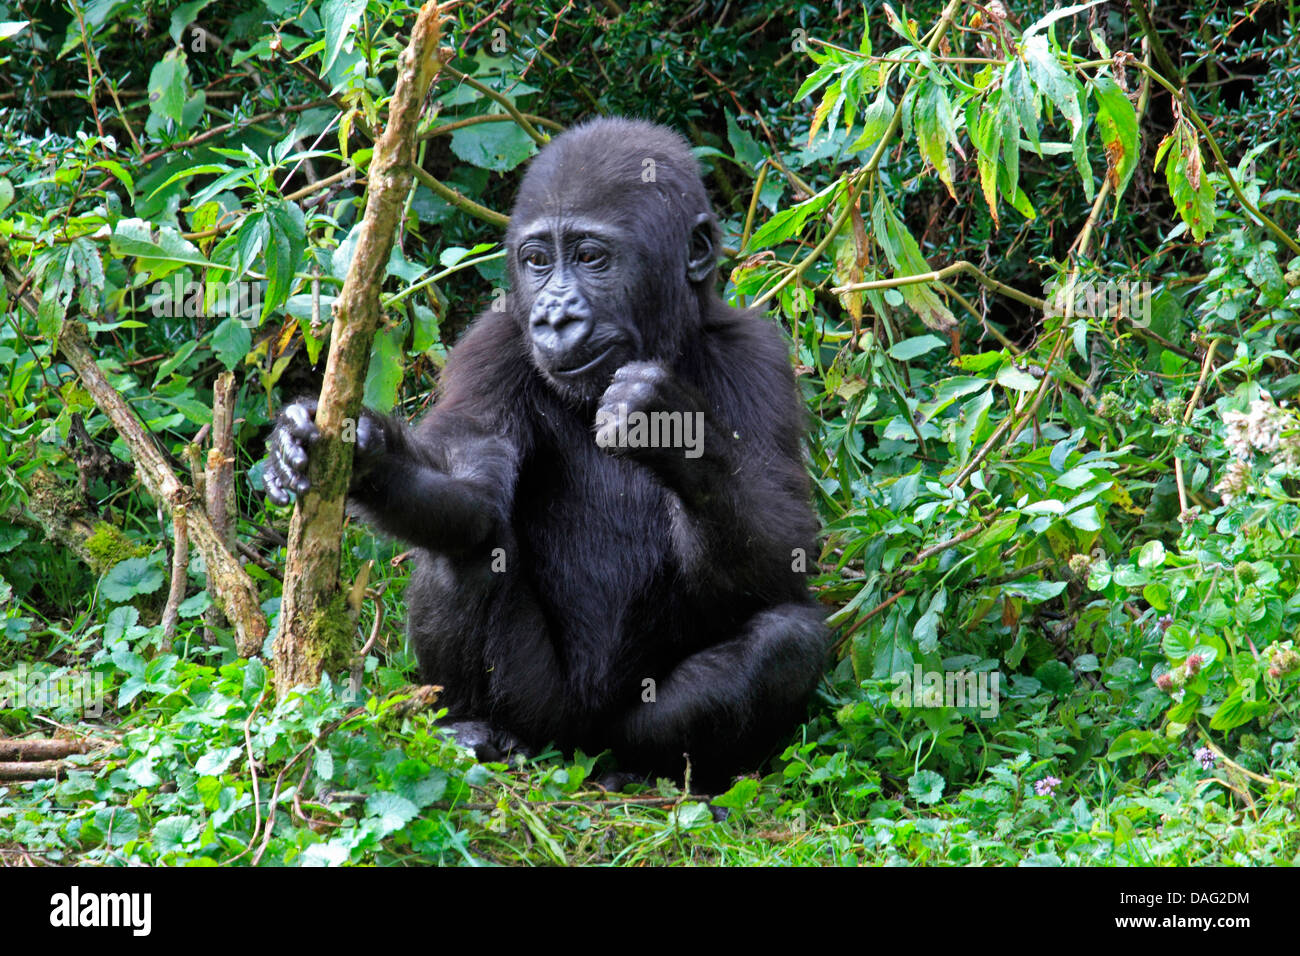 lowland gorilla (Gorilla gorilla gorilla), juvenile sitting at the edge of a thicket Stock Photo